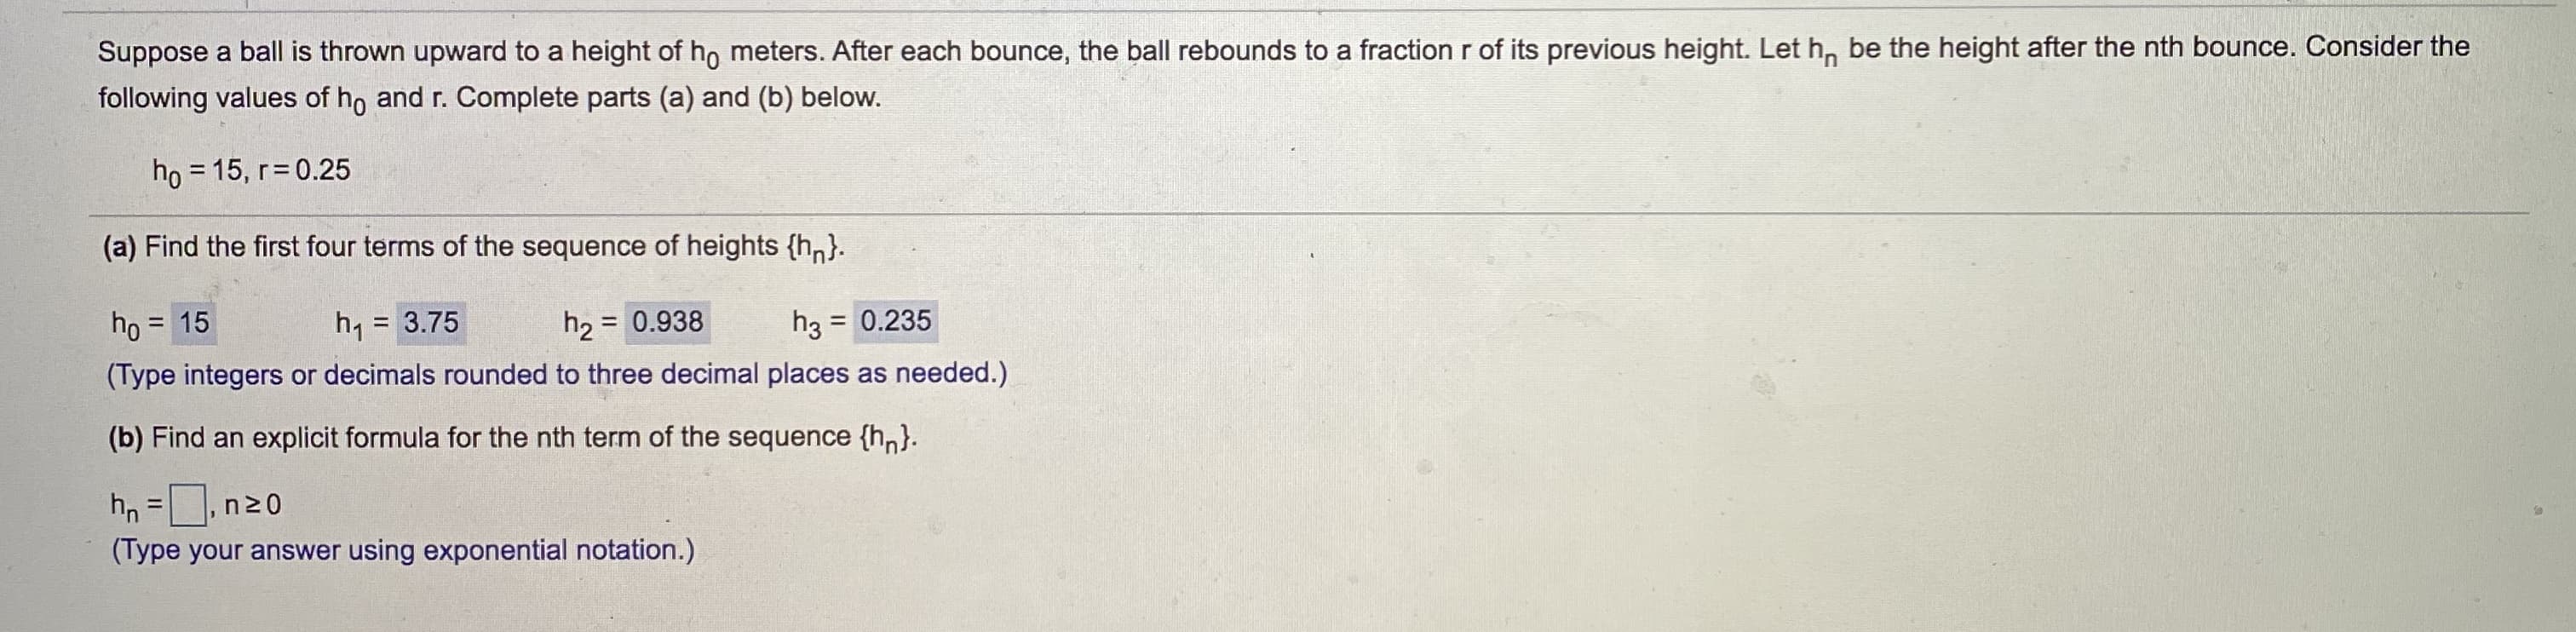 Suppose a ball is thrown upward to a height of ho meters. After each bounce, the ball rebounds to a fraction r of its previous height. Let h, be the height after the nth bounce. Consider the
following values of ho and r. Complete parts (a) and (b) below.
ho = 15, r 0.25
%3D
(a) Find the first four terms of the sequence of heights {hn}.
ho = 15
h2 = 0.938
(Type integers or decimals rounded to three decimal places as needed.)
h, = 3.75
%3D
h3 = 0.235
%3D
(b) Find an explicit formula for the nth term of the sequence {h,}.
hn =,n20
%3D
(Type your answer using exponential notation.)
